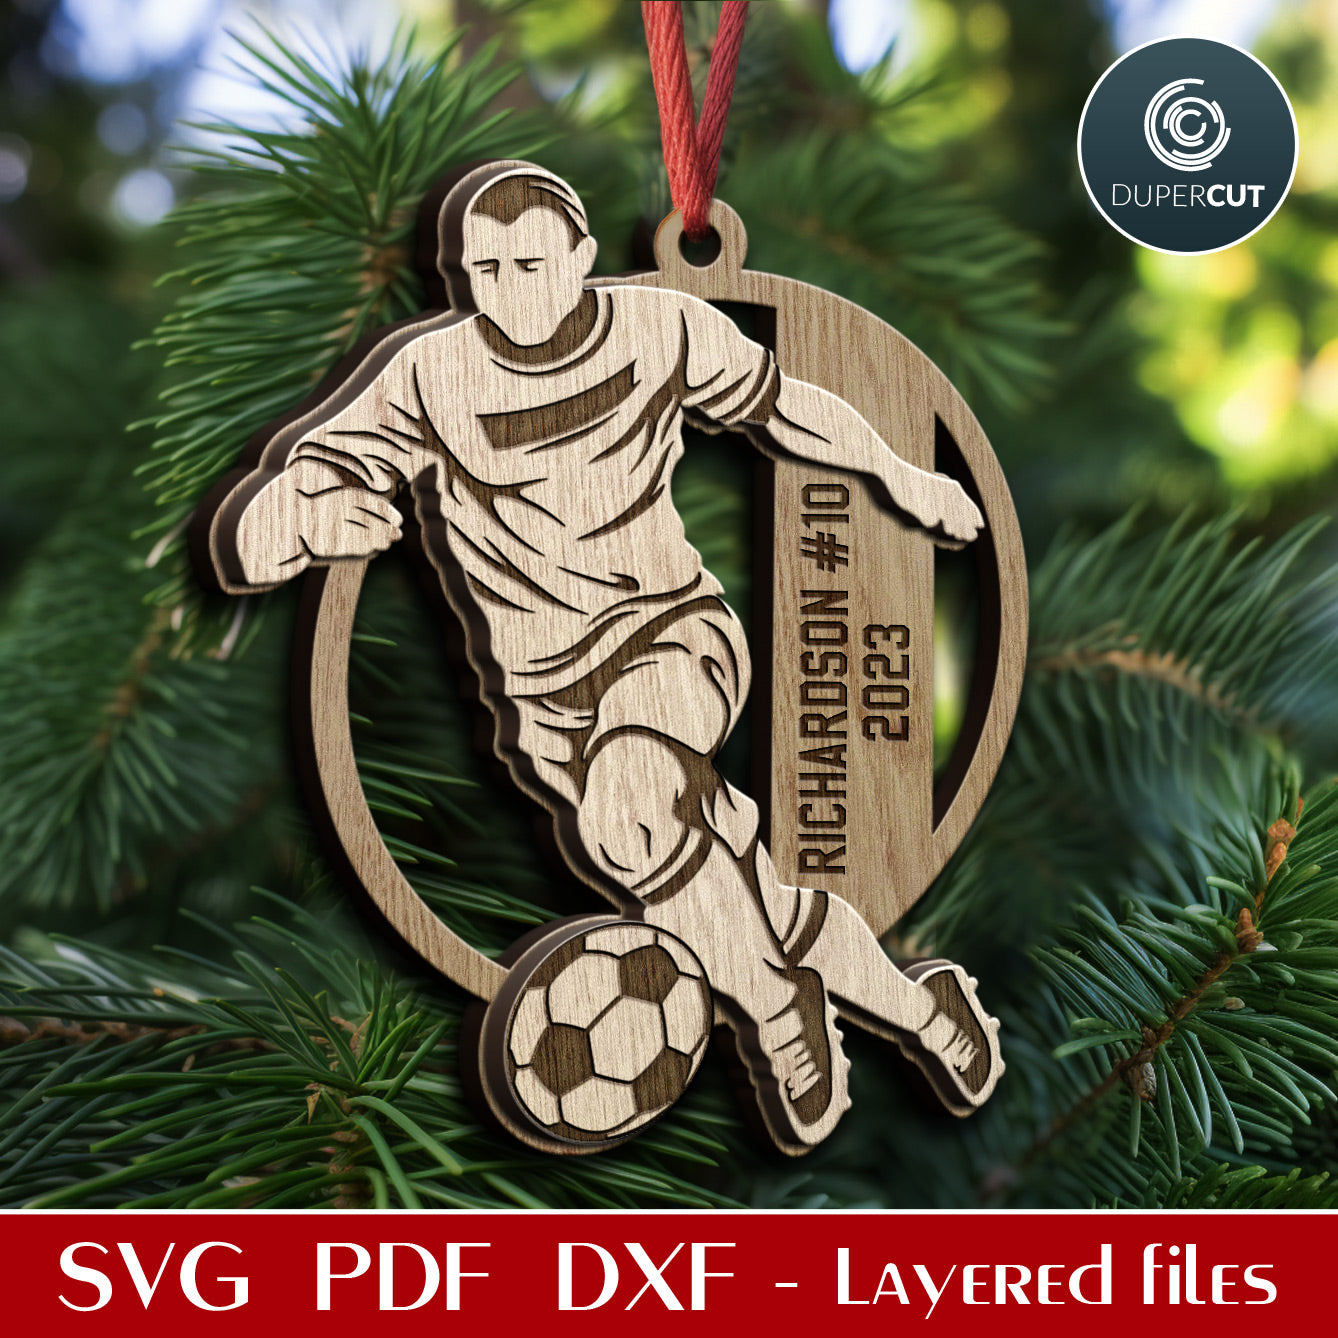 Soccer / football player holiday ornament, personalized sports Christmas gift, SVG layered file template for laser machines Glowforge, Cricut, X-tool, CNC plasma by www.DuperCut.com